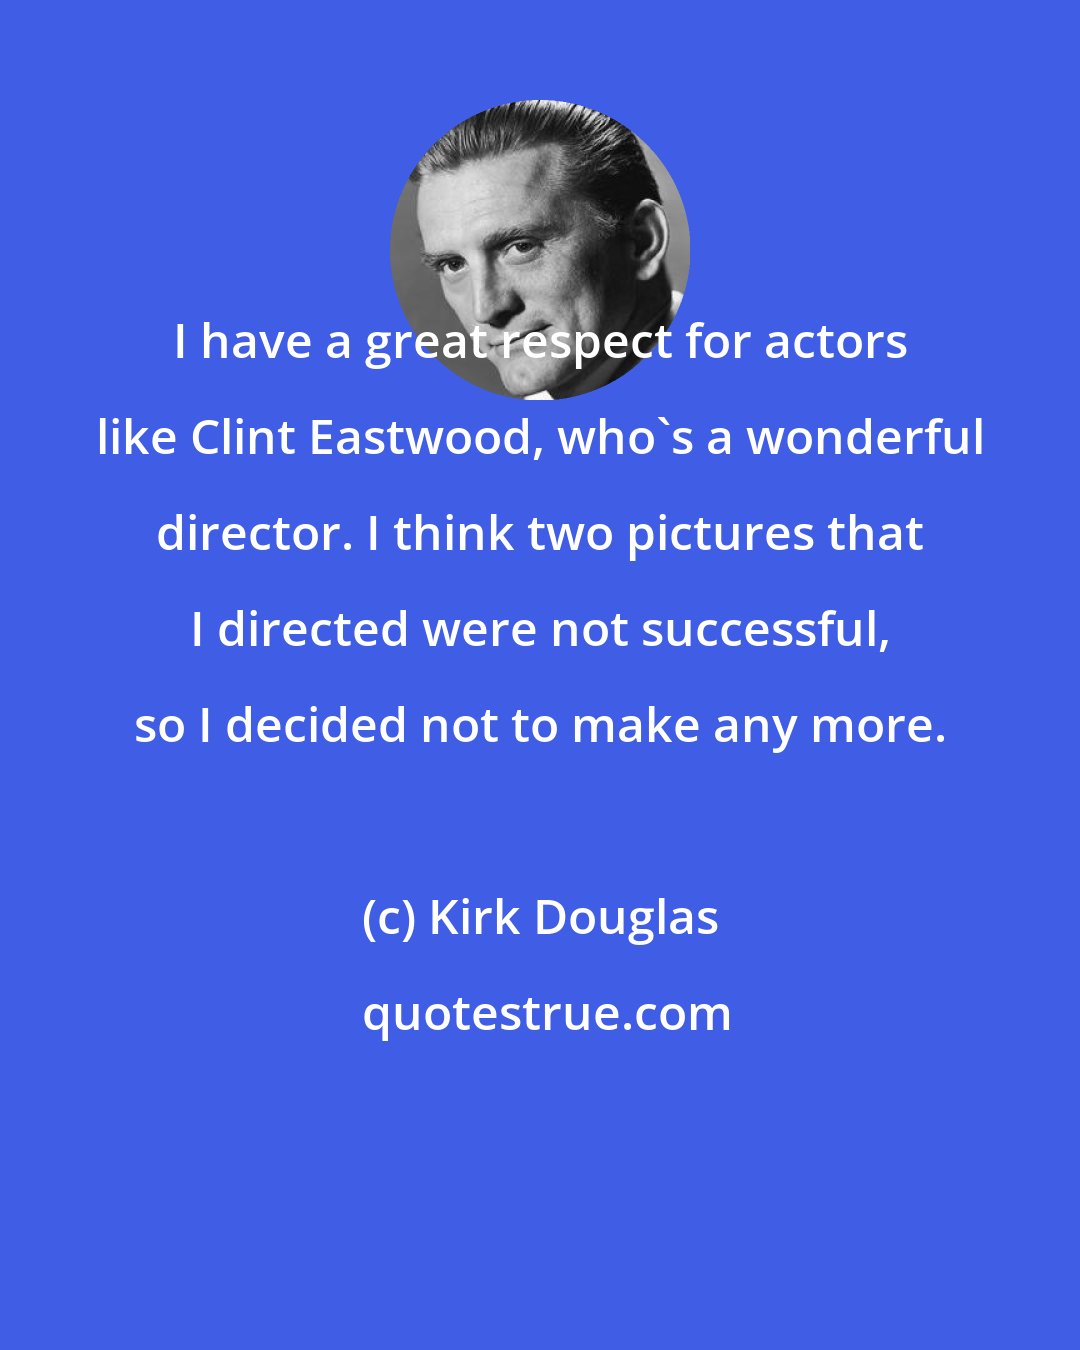 Kirk Douglas: I have a great respect for actors like Clint Eastwood, who's a wonderful director. I think two pictures that I directed were not successful, so I decided not to make any more.